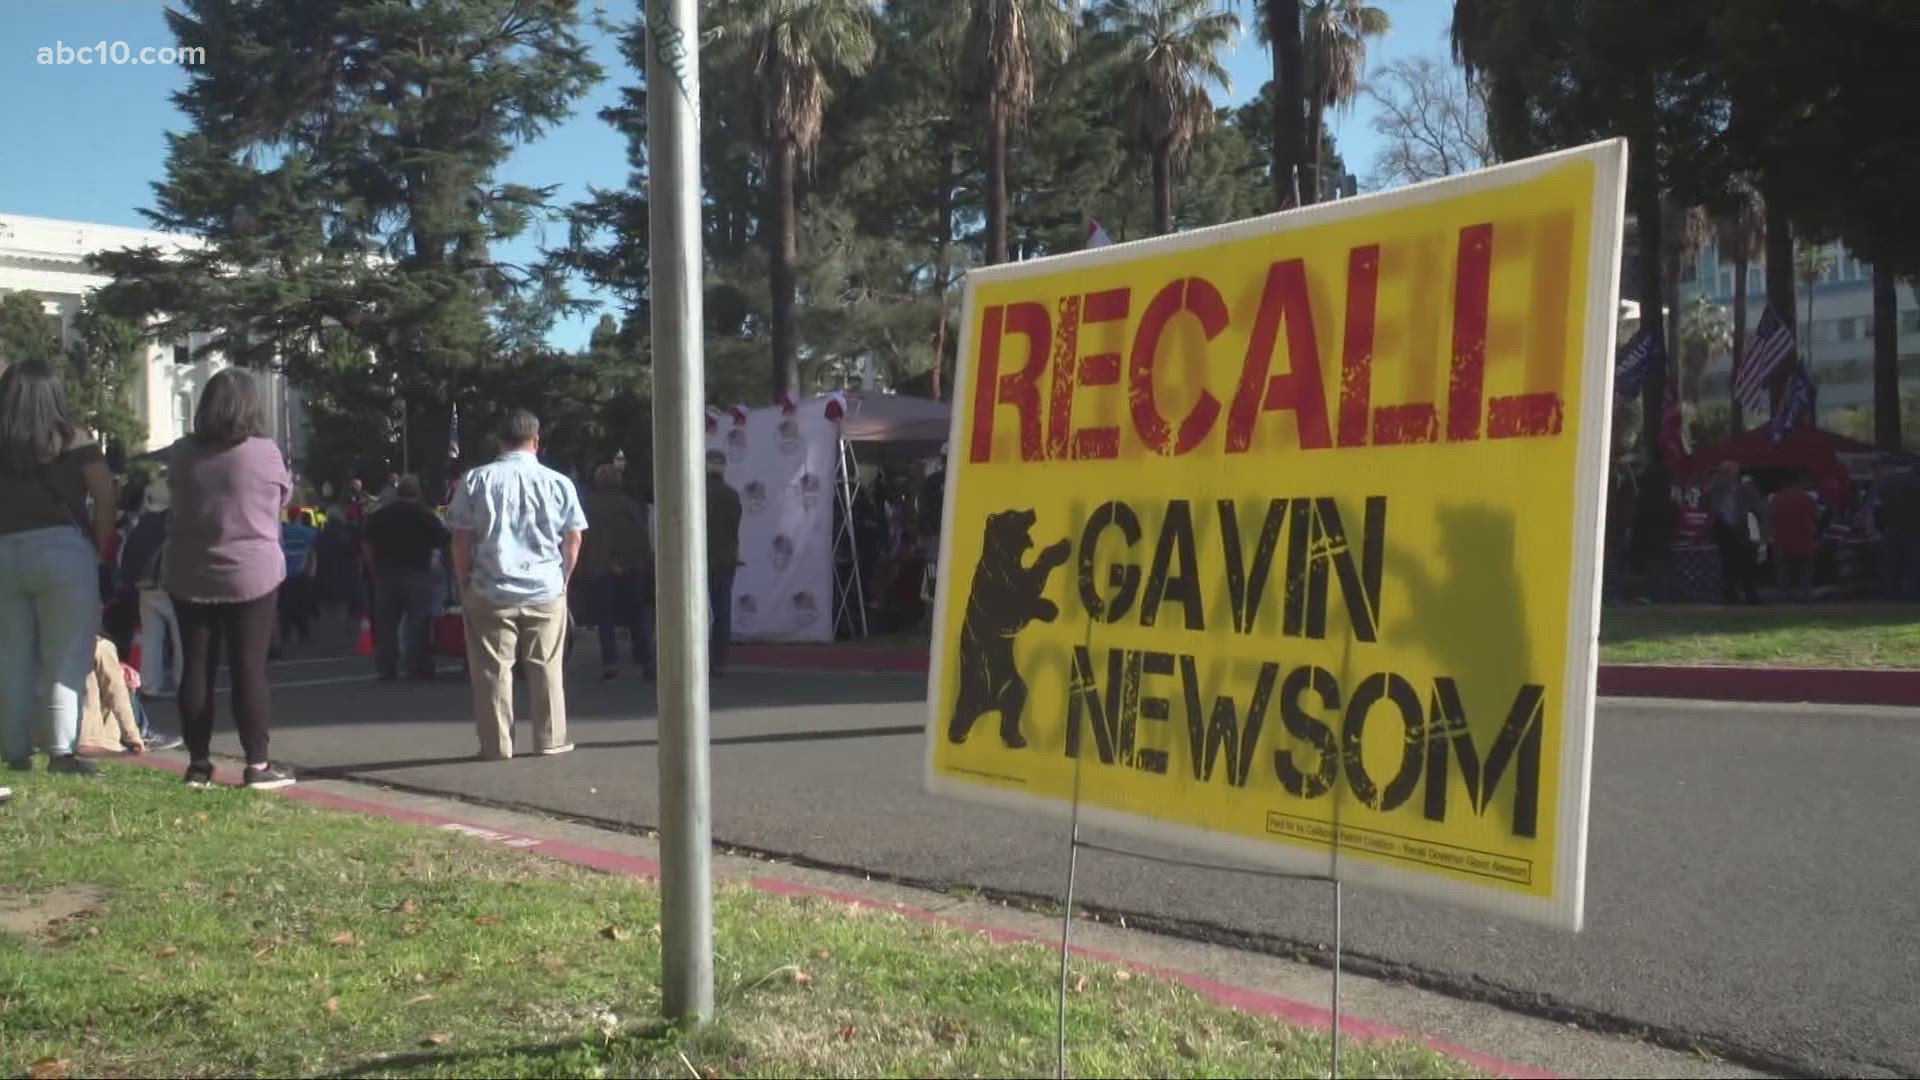 1.5 million signatures need to be verified to force a recall on California Governor Gavin Newsom.